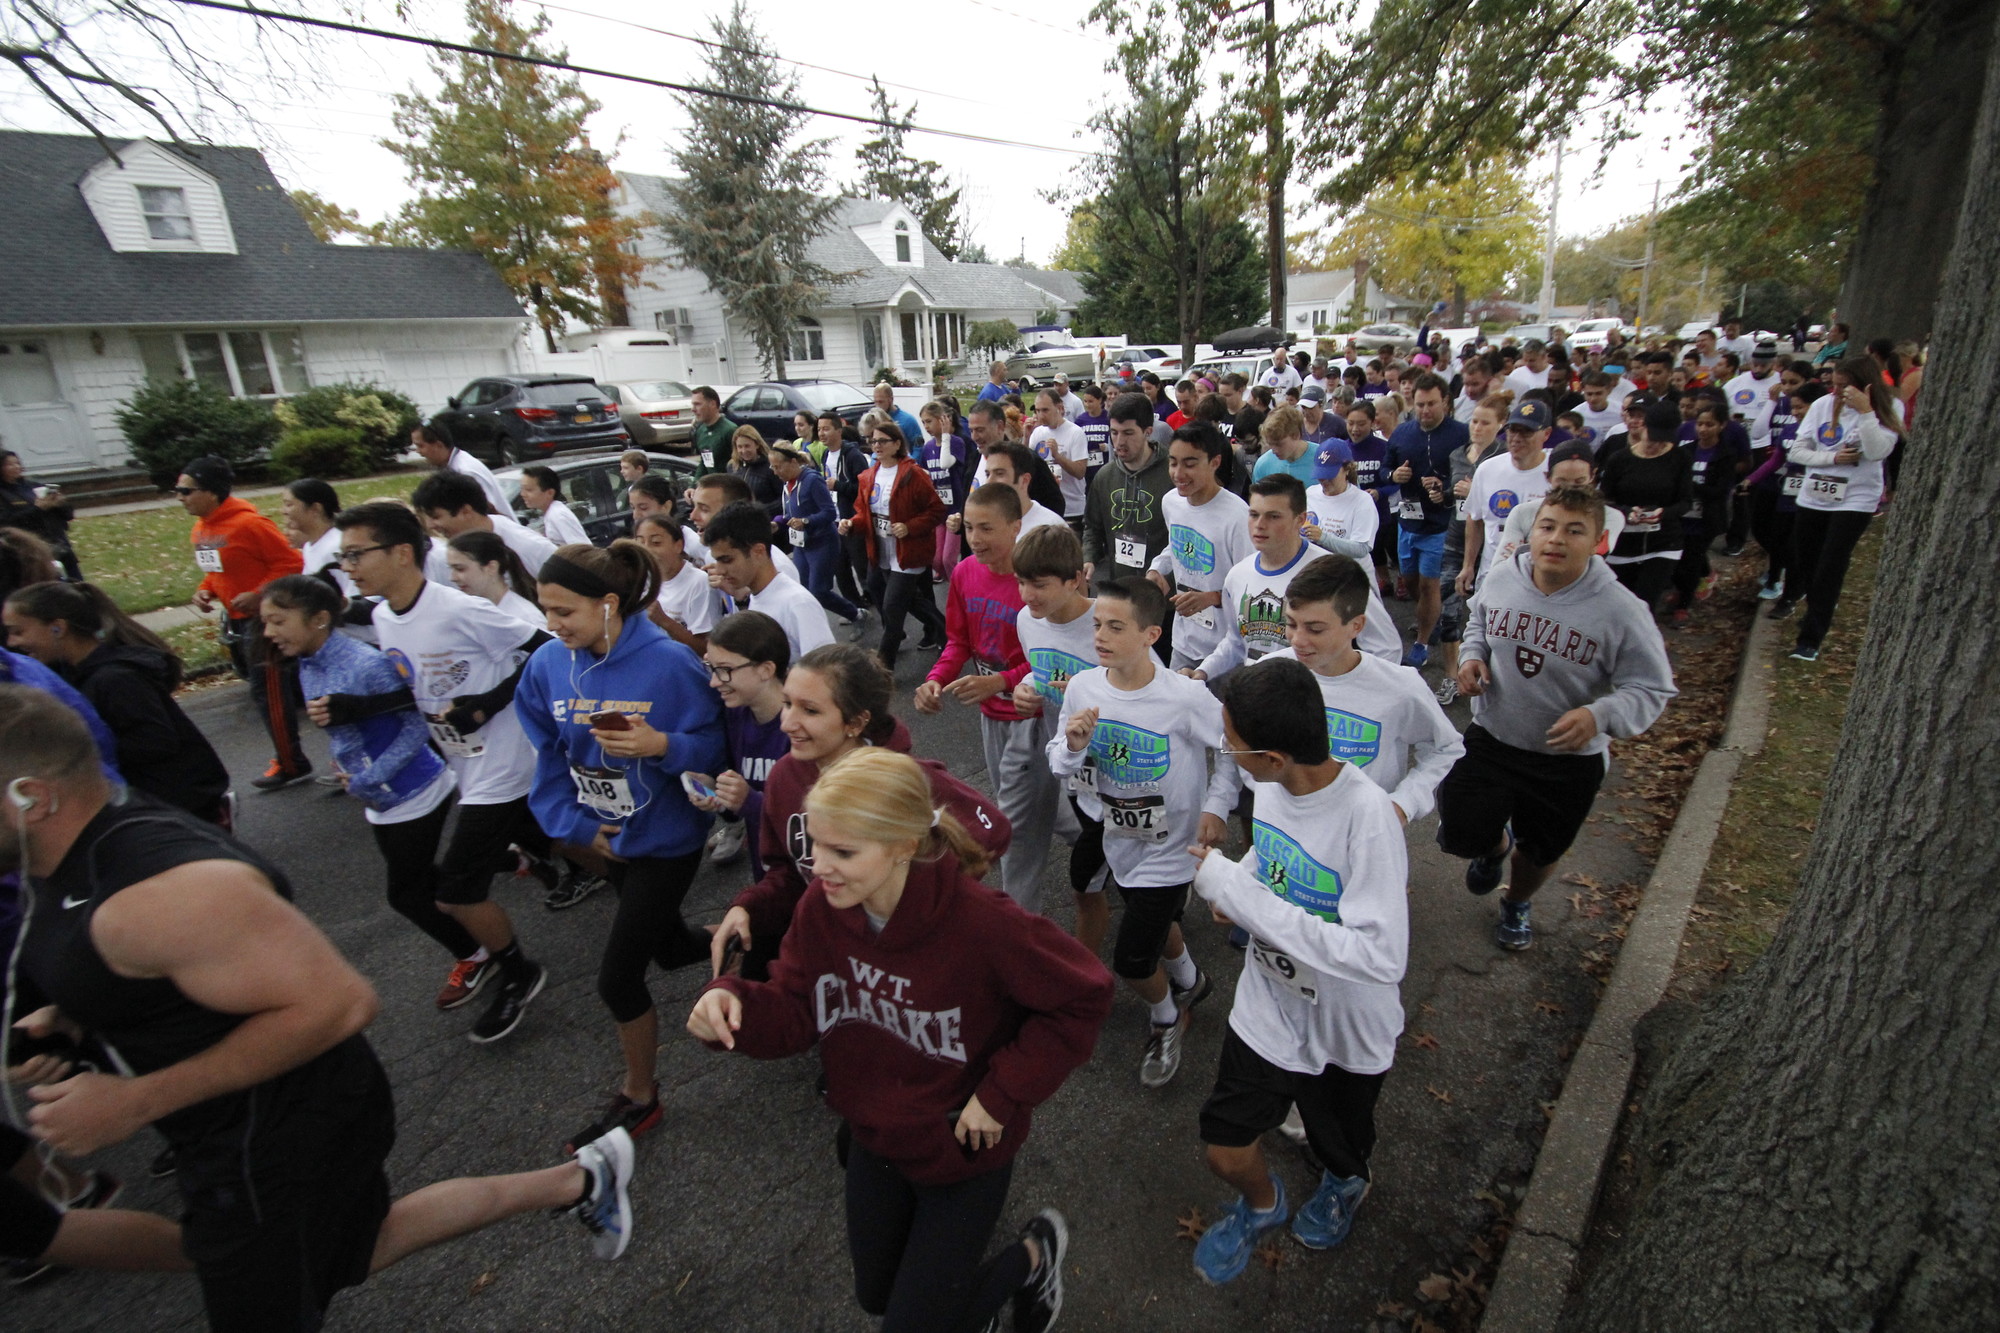 The 3rd annual McVey 5k was off at 9 a.m. on Sunday. Hundreds of participants ran through the streets surrounding the school.